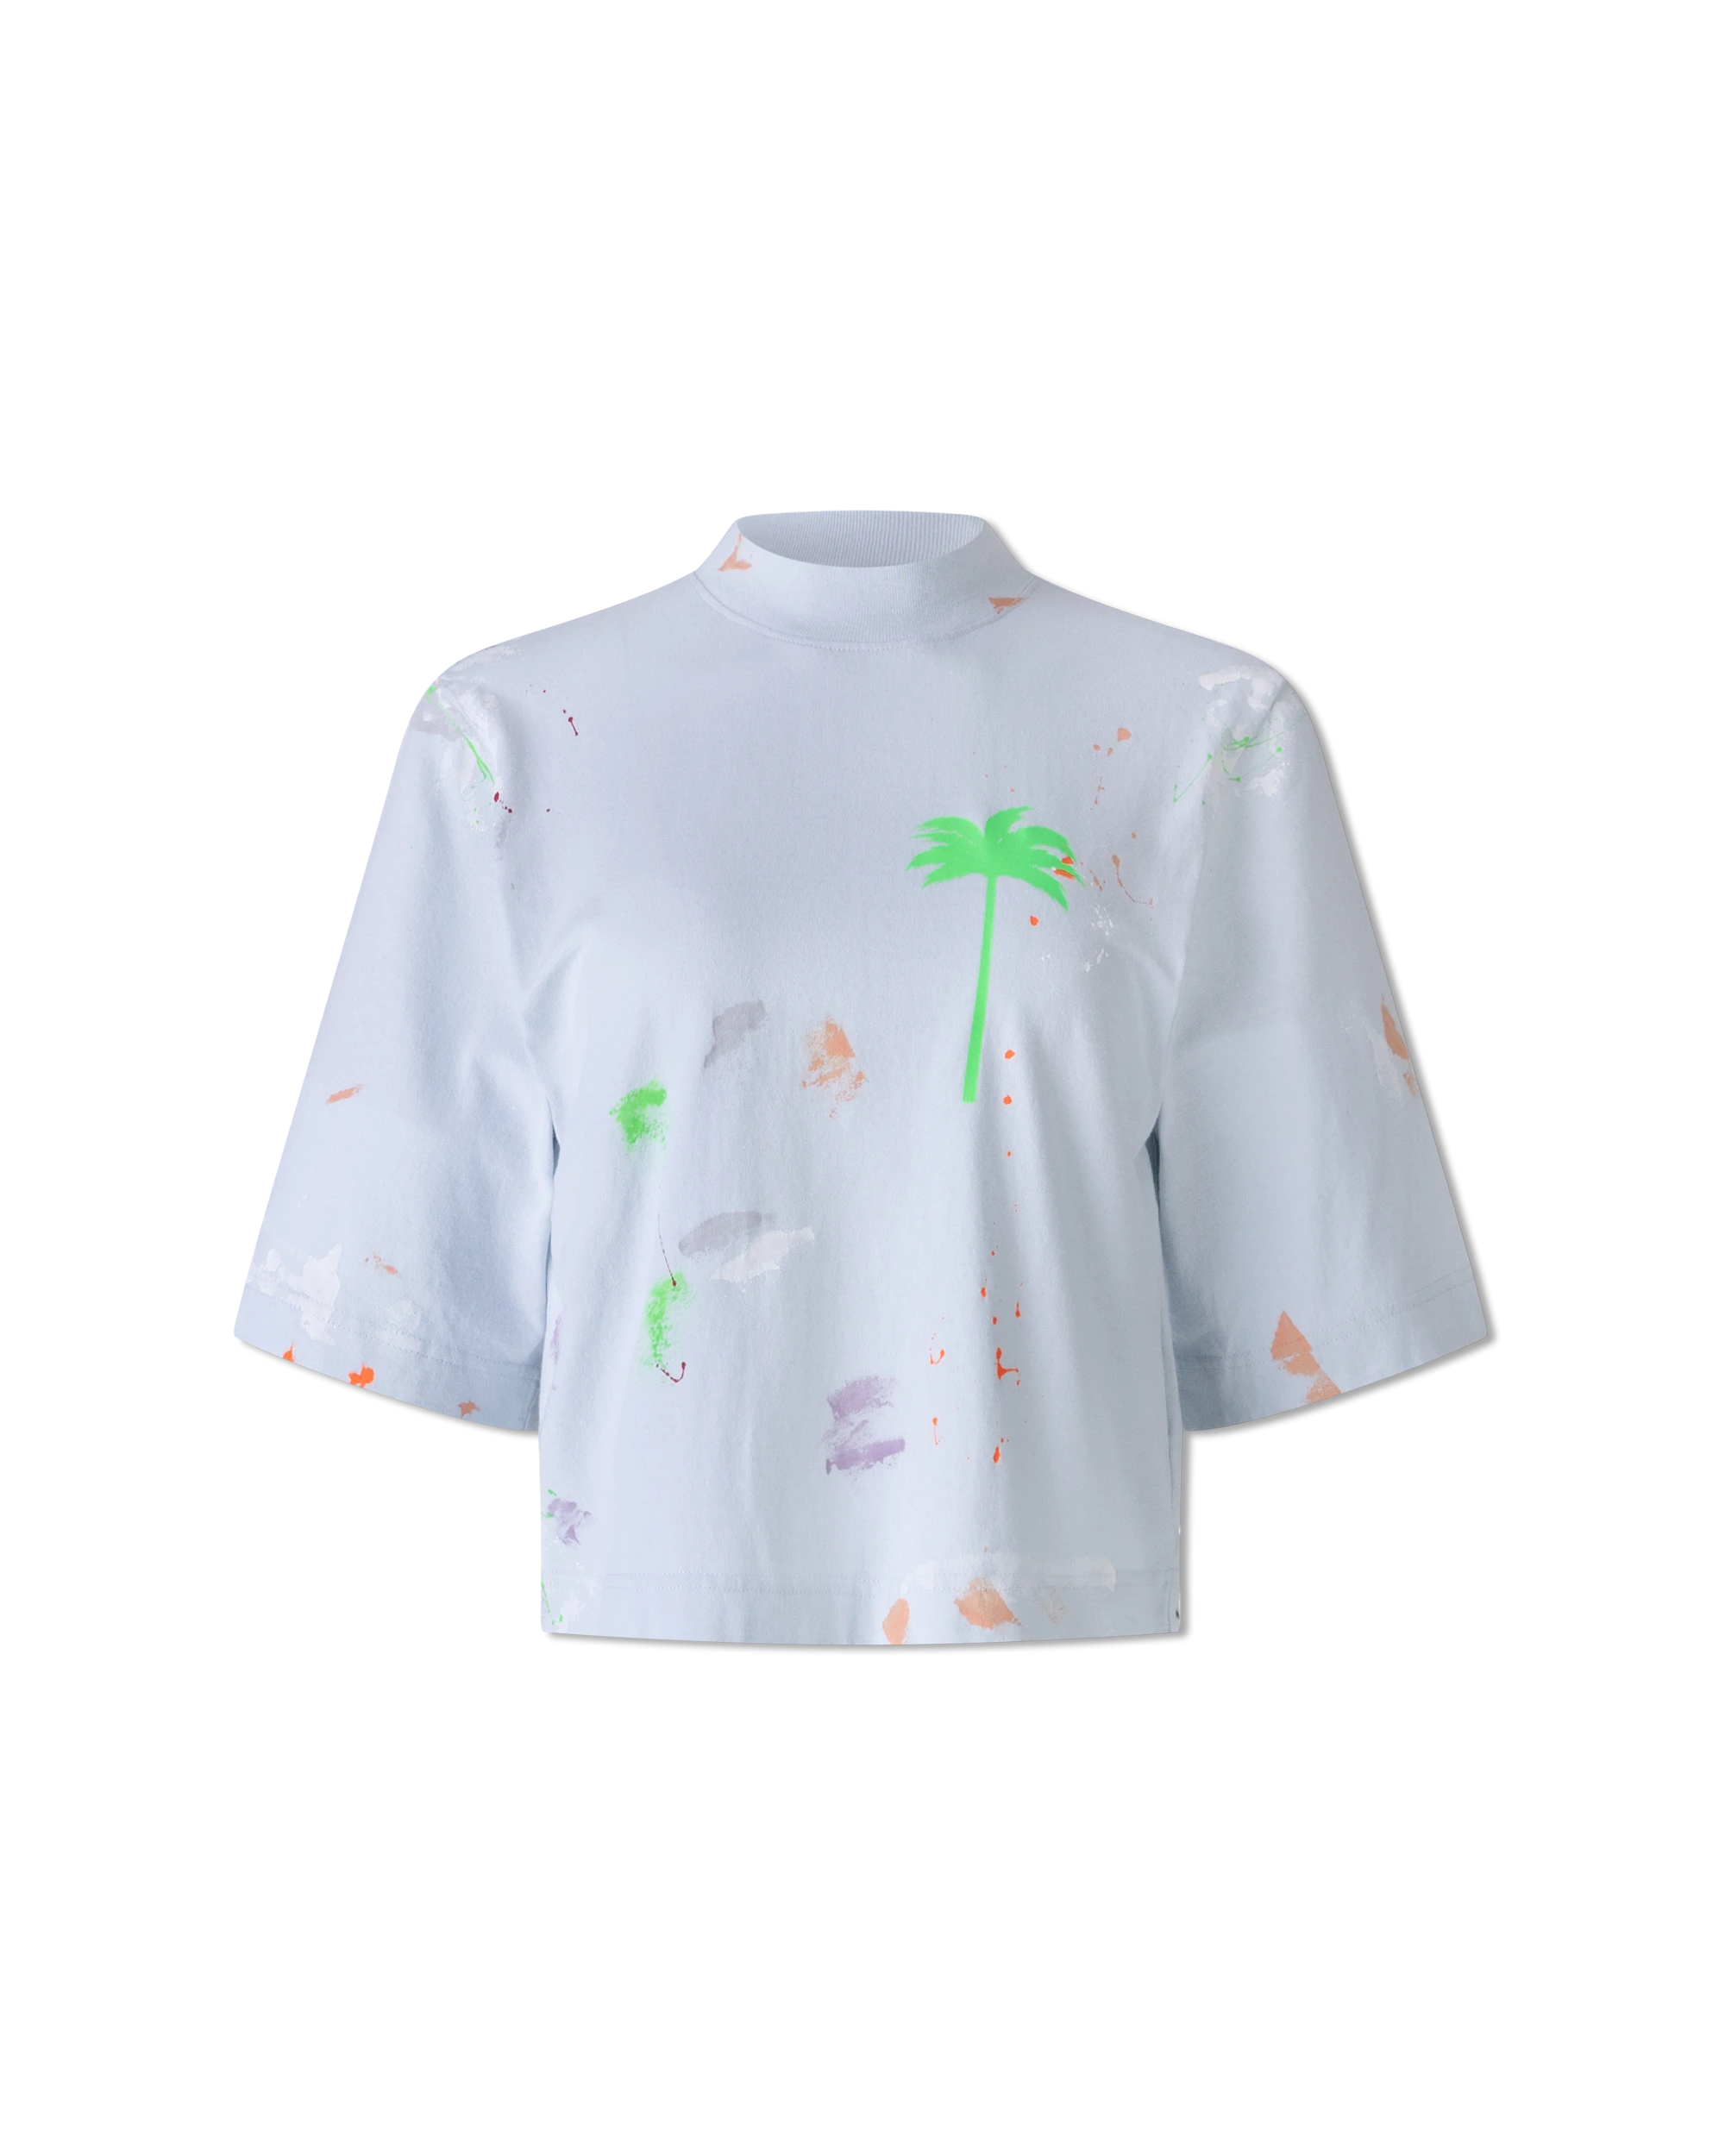 Splatter Painted Cropped T-Shirt